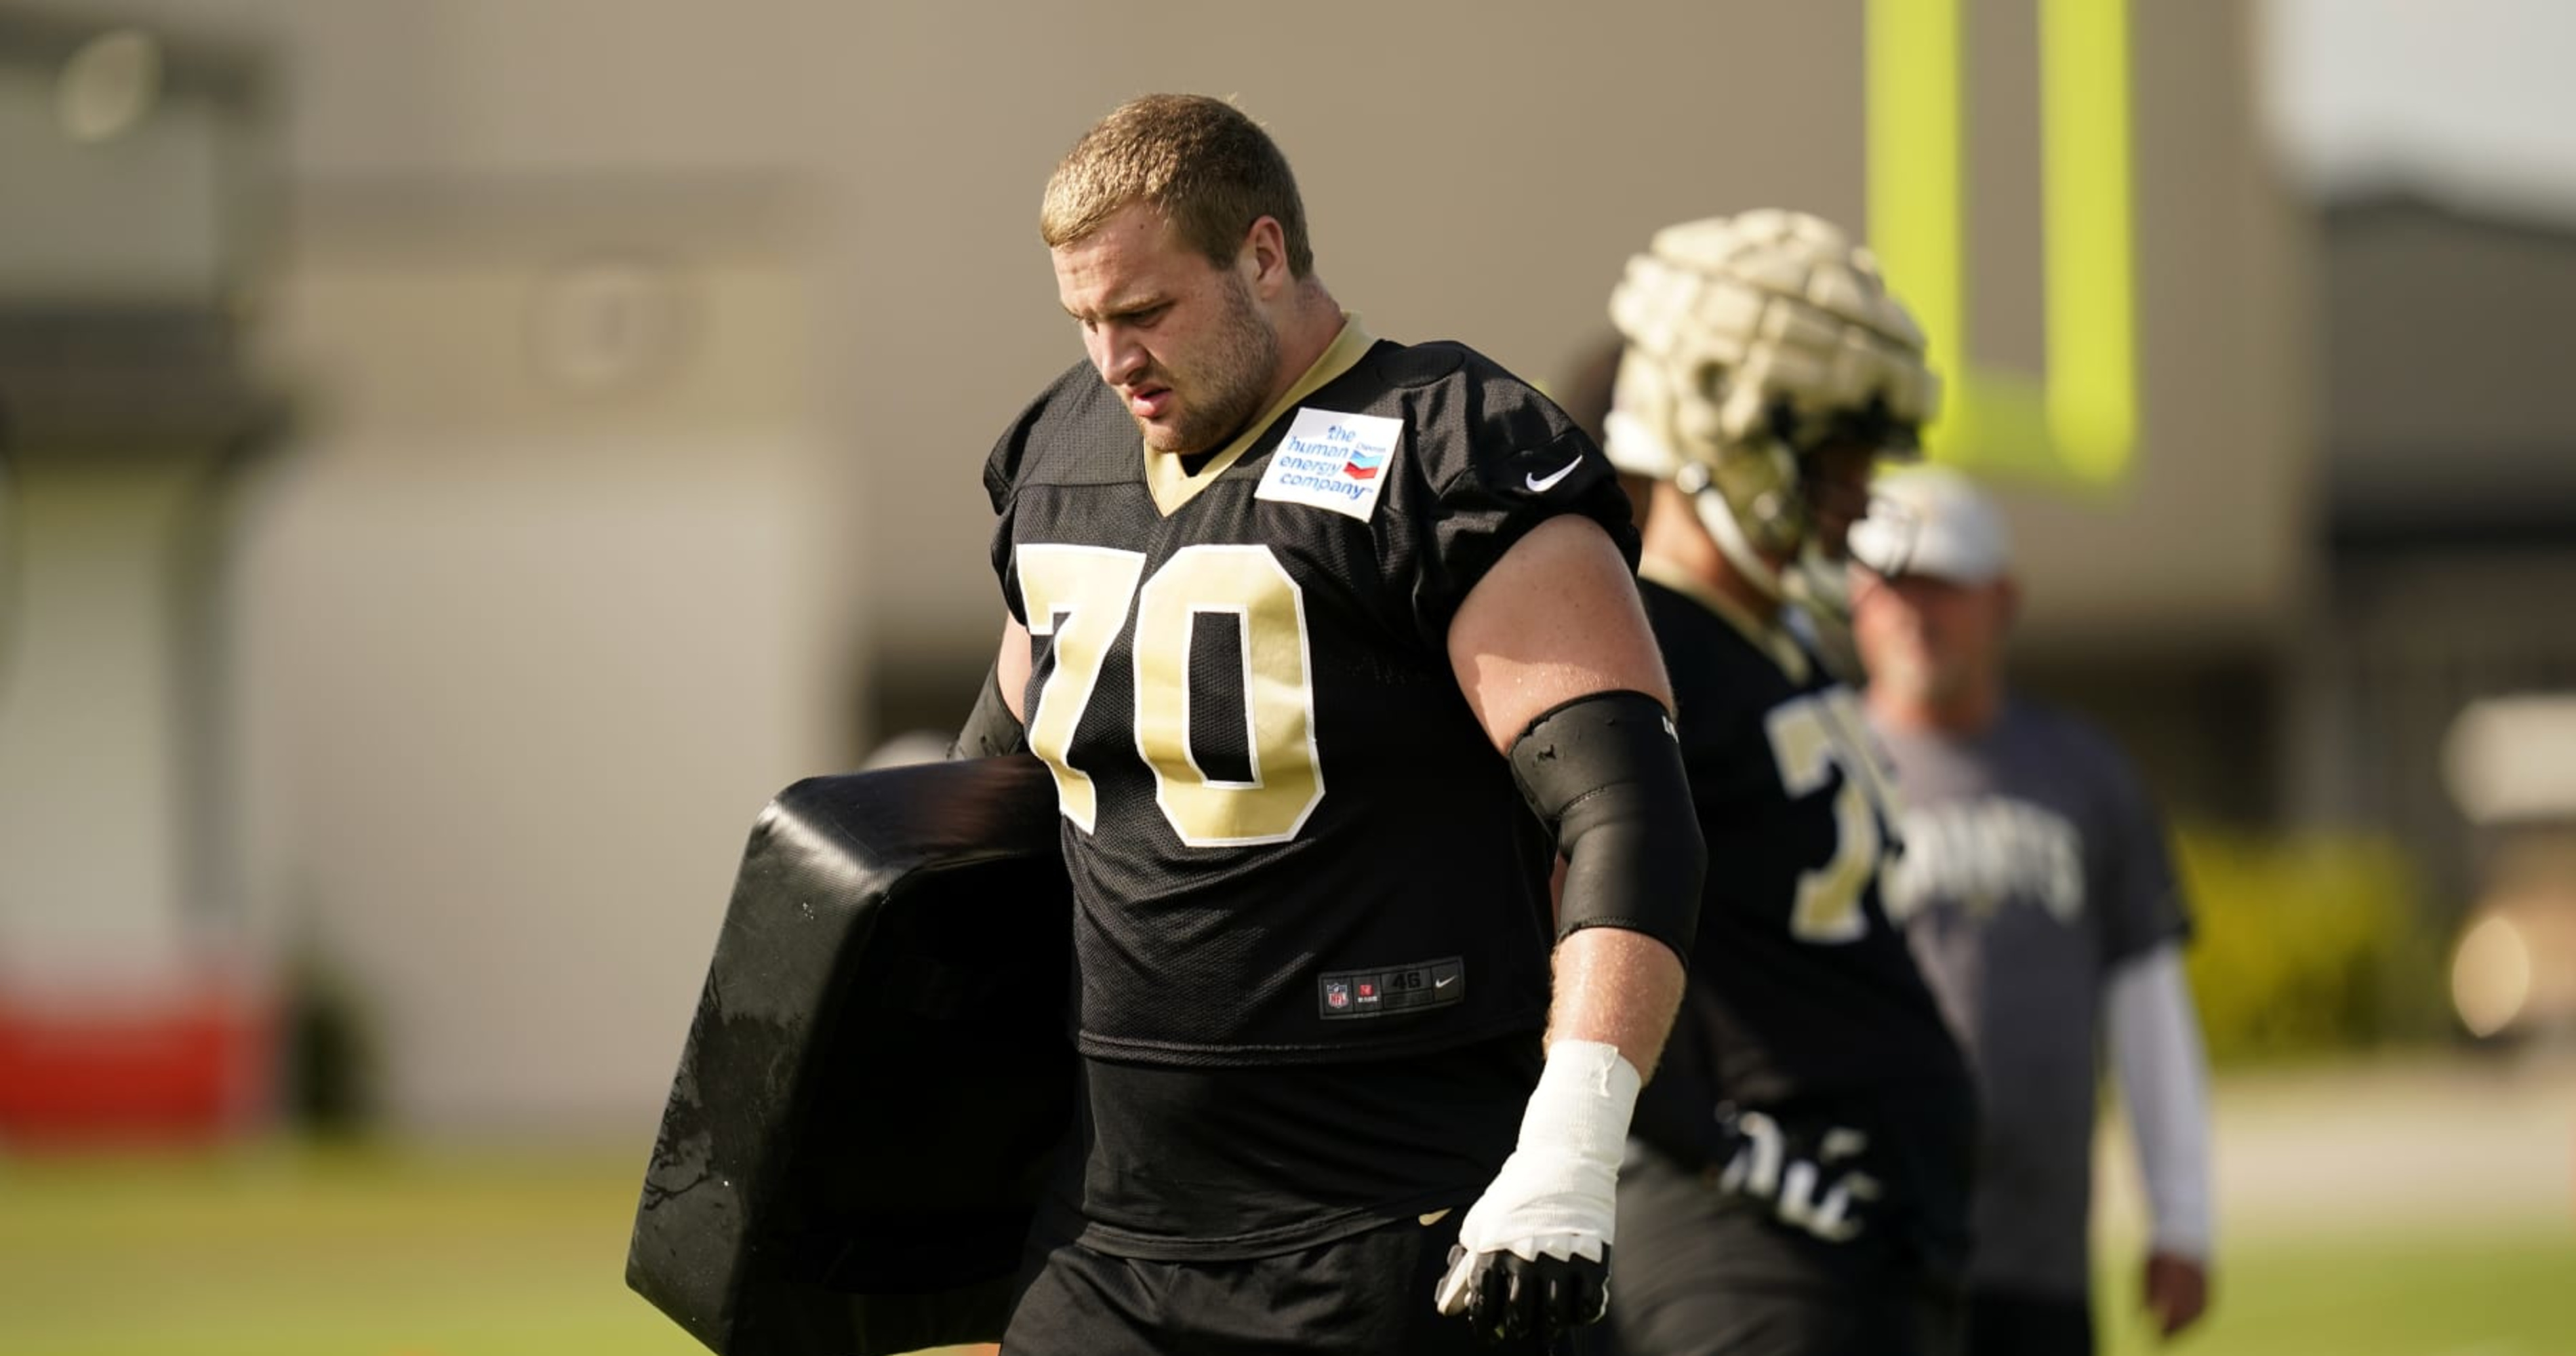 Saints' Trevor Penning Kicked out of Practice for Fighting 3 Days in a Row